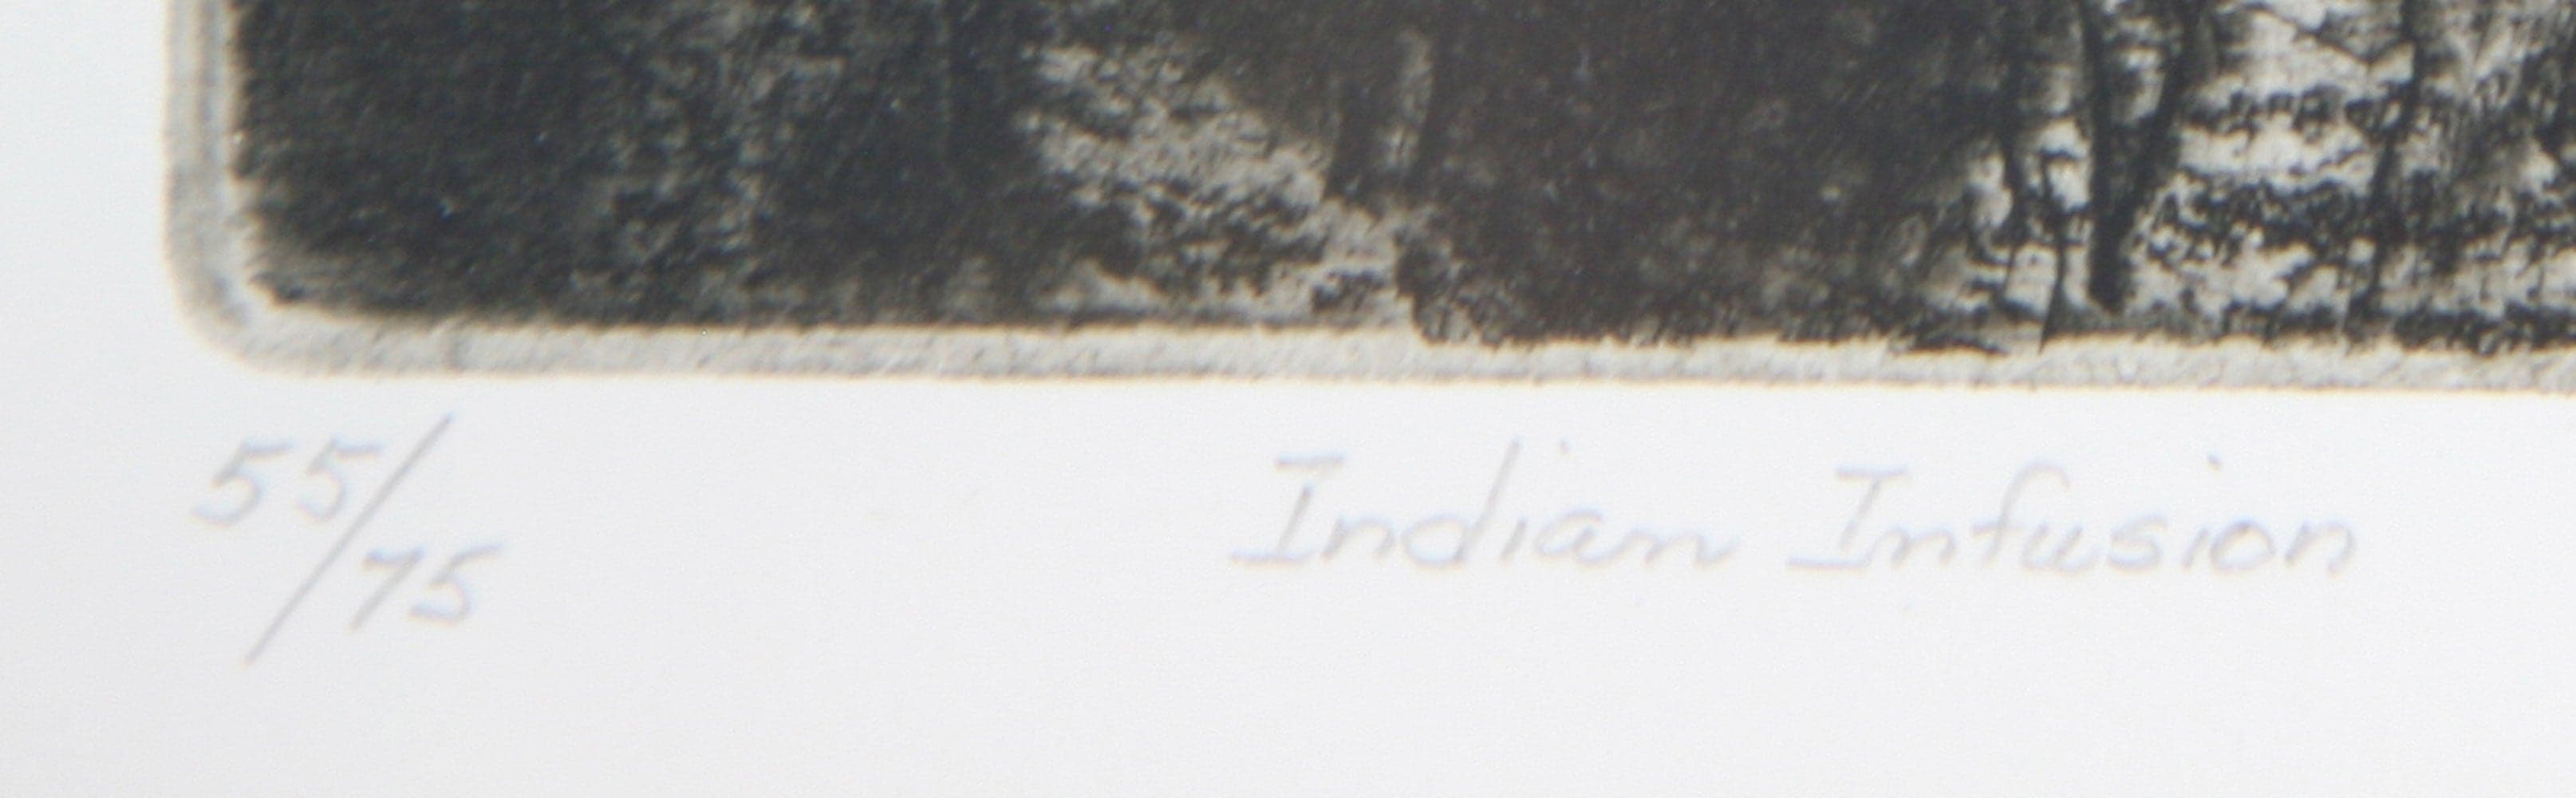 Gene Kloss (1903-1996) - Indian Infusion (PDC90817-041-001)